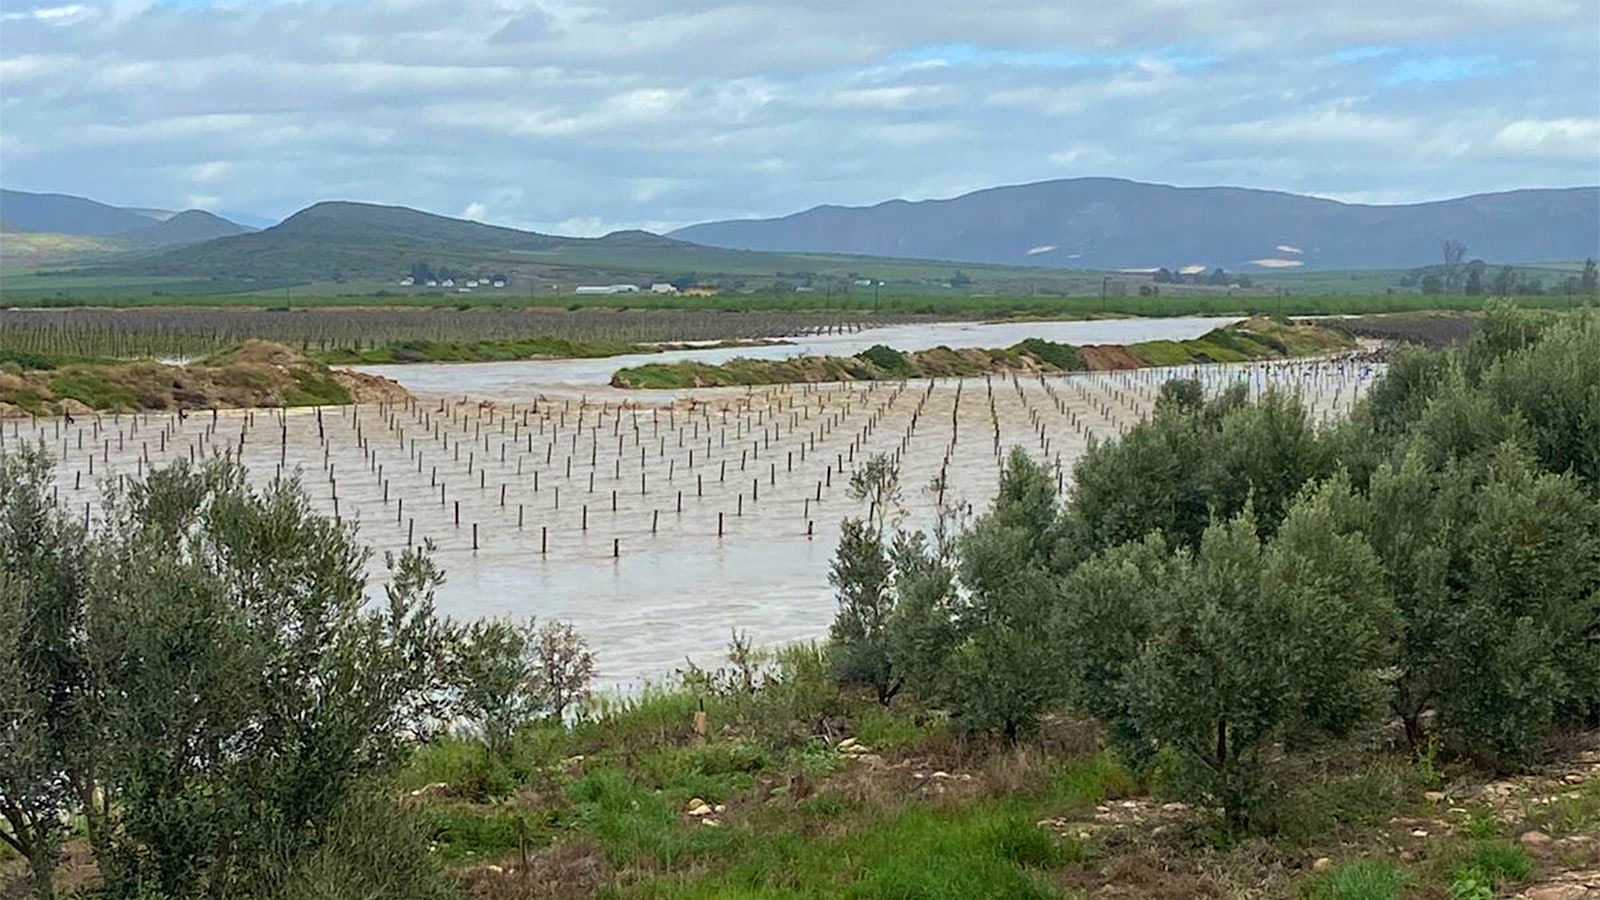  A Springfield vineyard was mostly flooded by the storms.